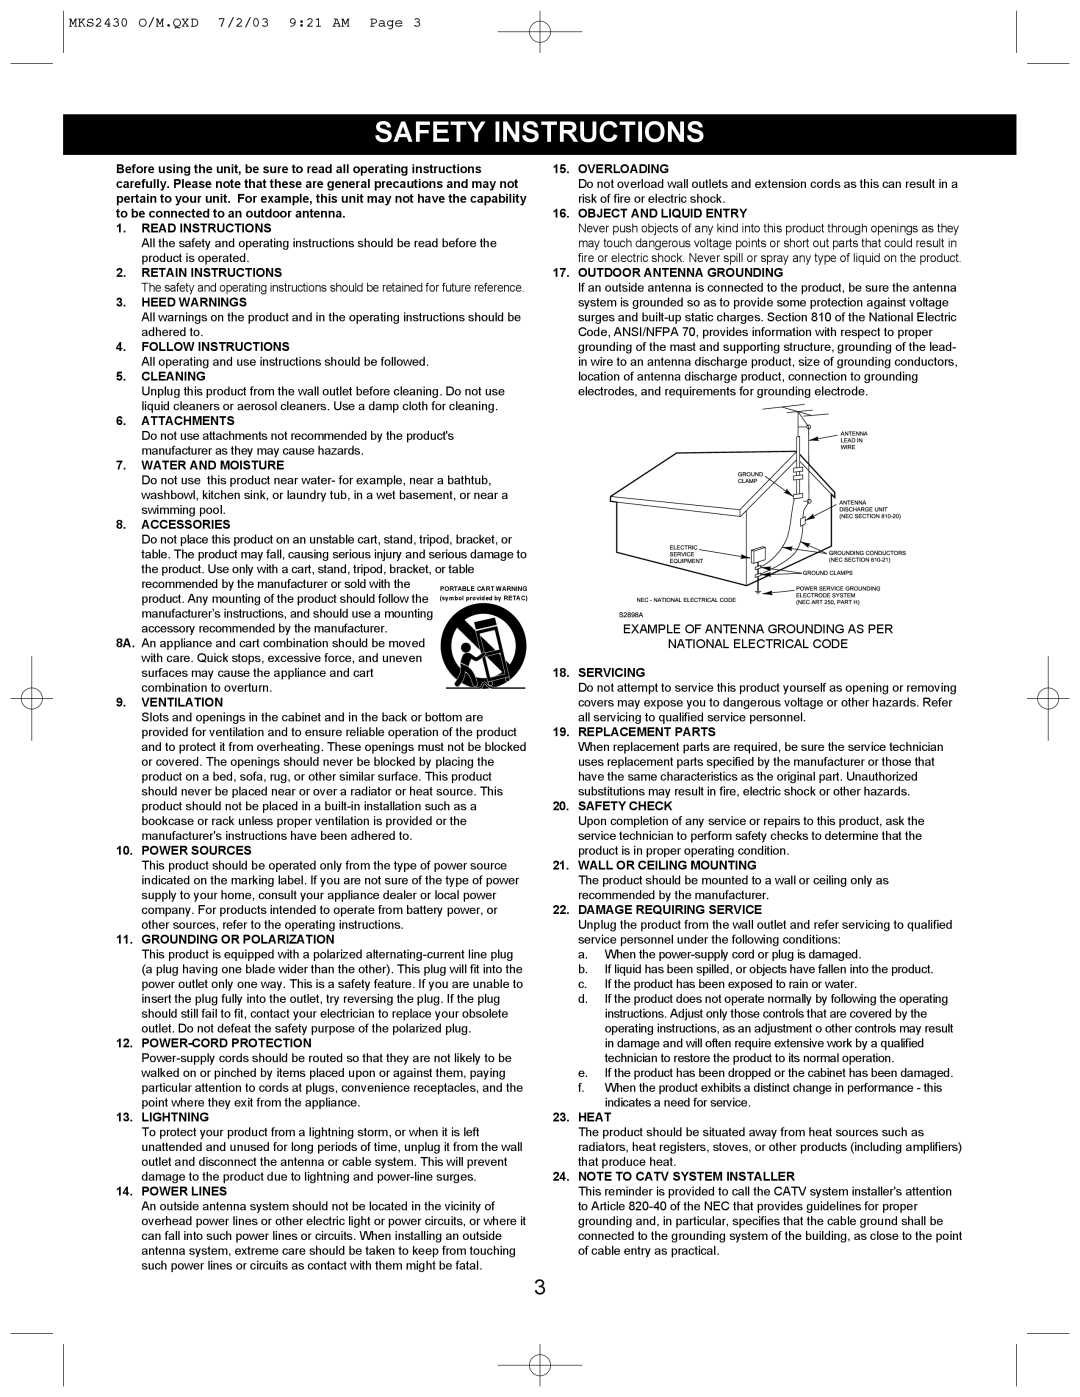 Memorex manual Safety Instructions, MKS2430 O/M.QXD 7/2/03 921 AM Page 